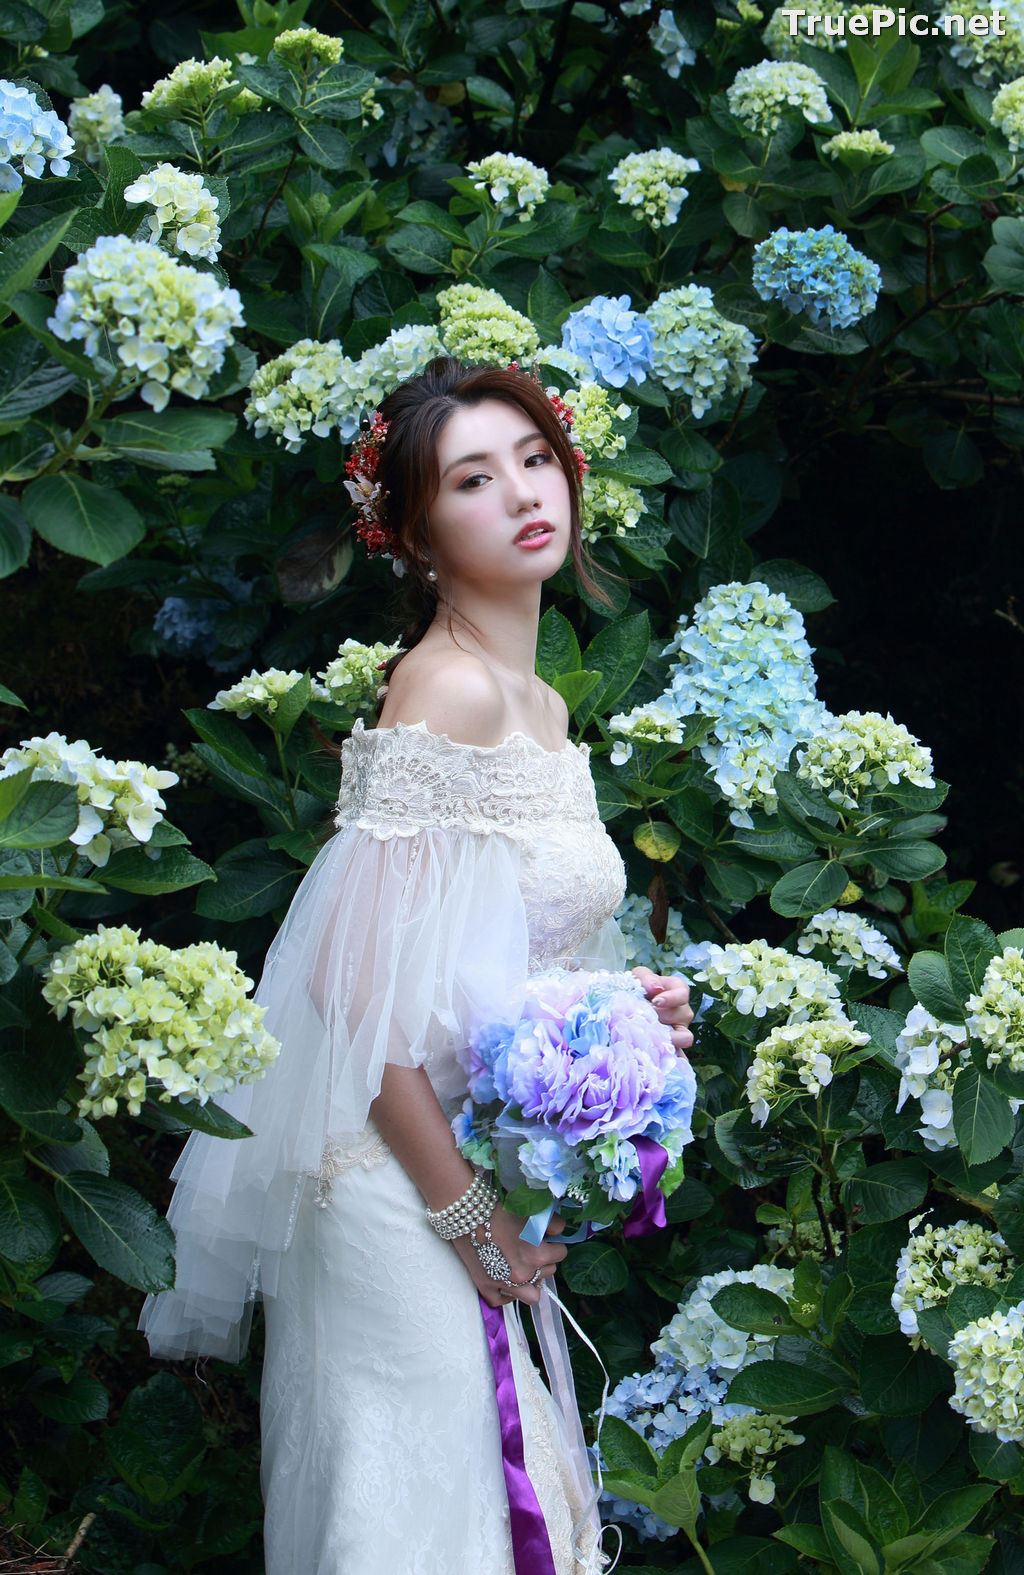 Image Taiwanese Model - 張倫甄 - Beautiful Bride and Hydrangea Flowers - TruePic.net - Picture-19